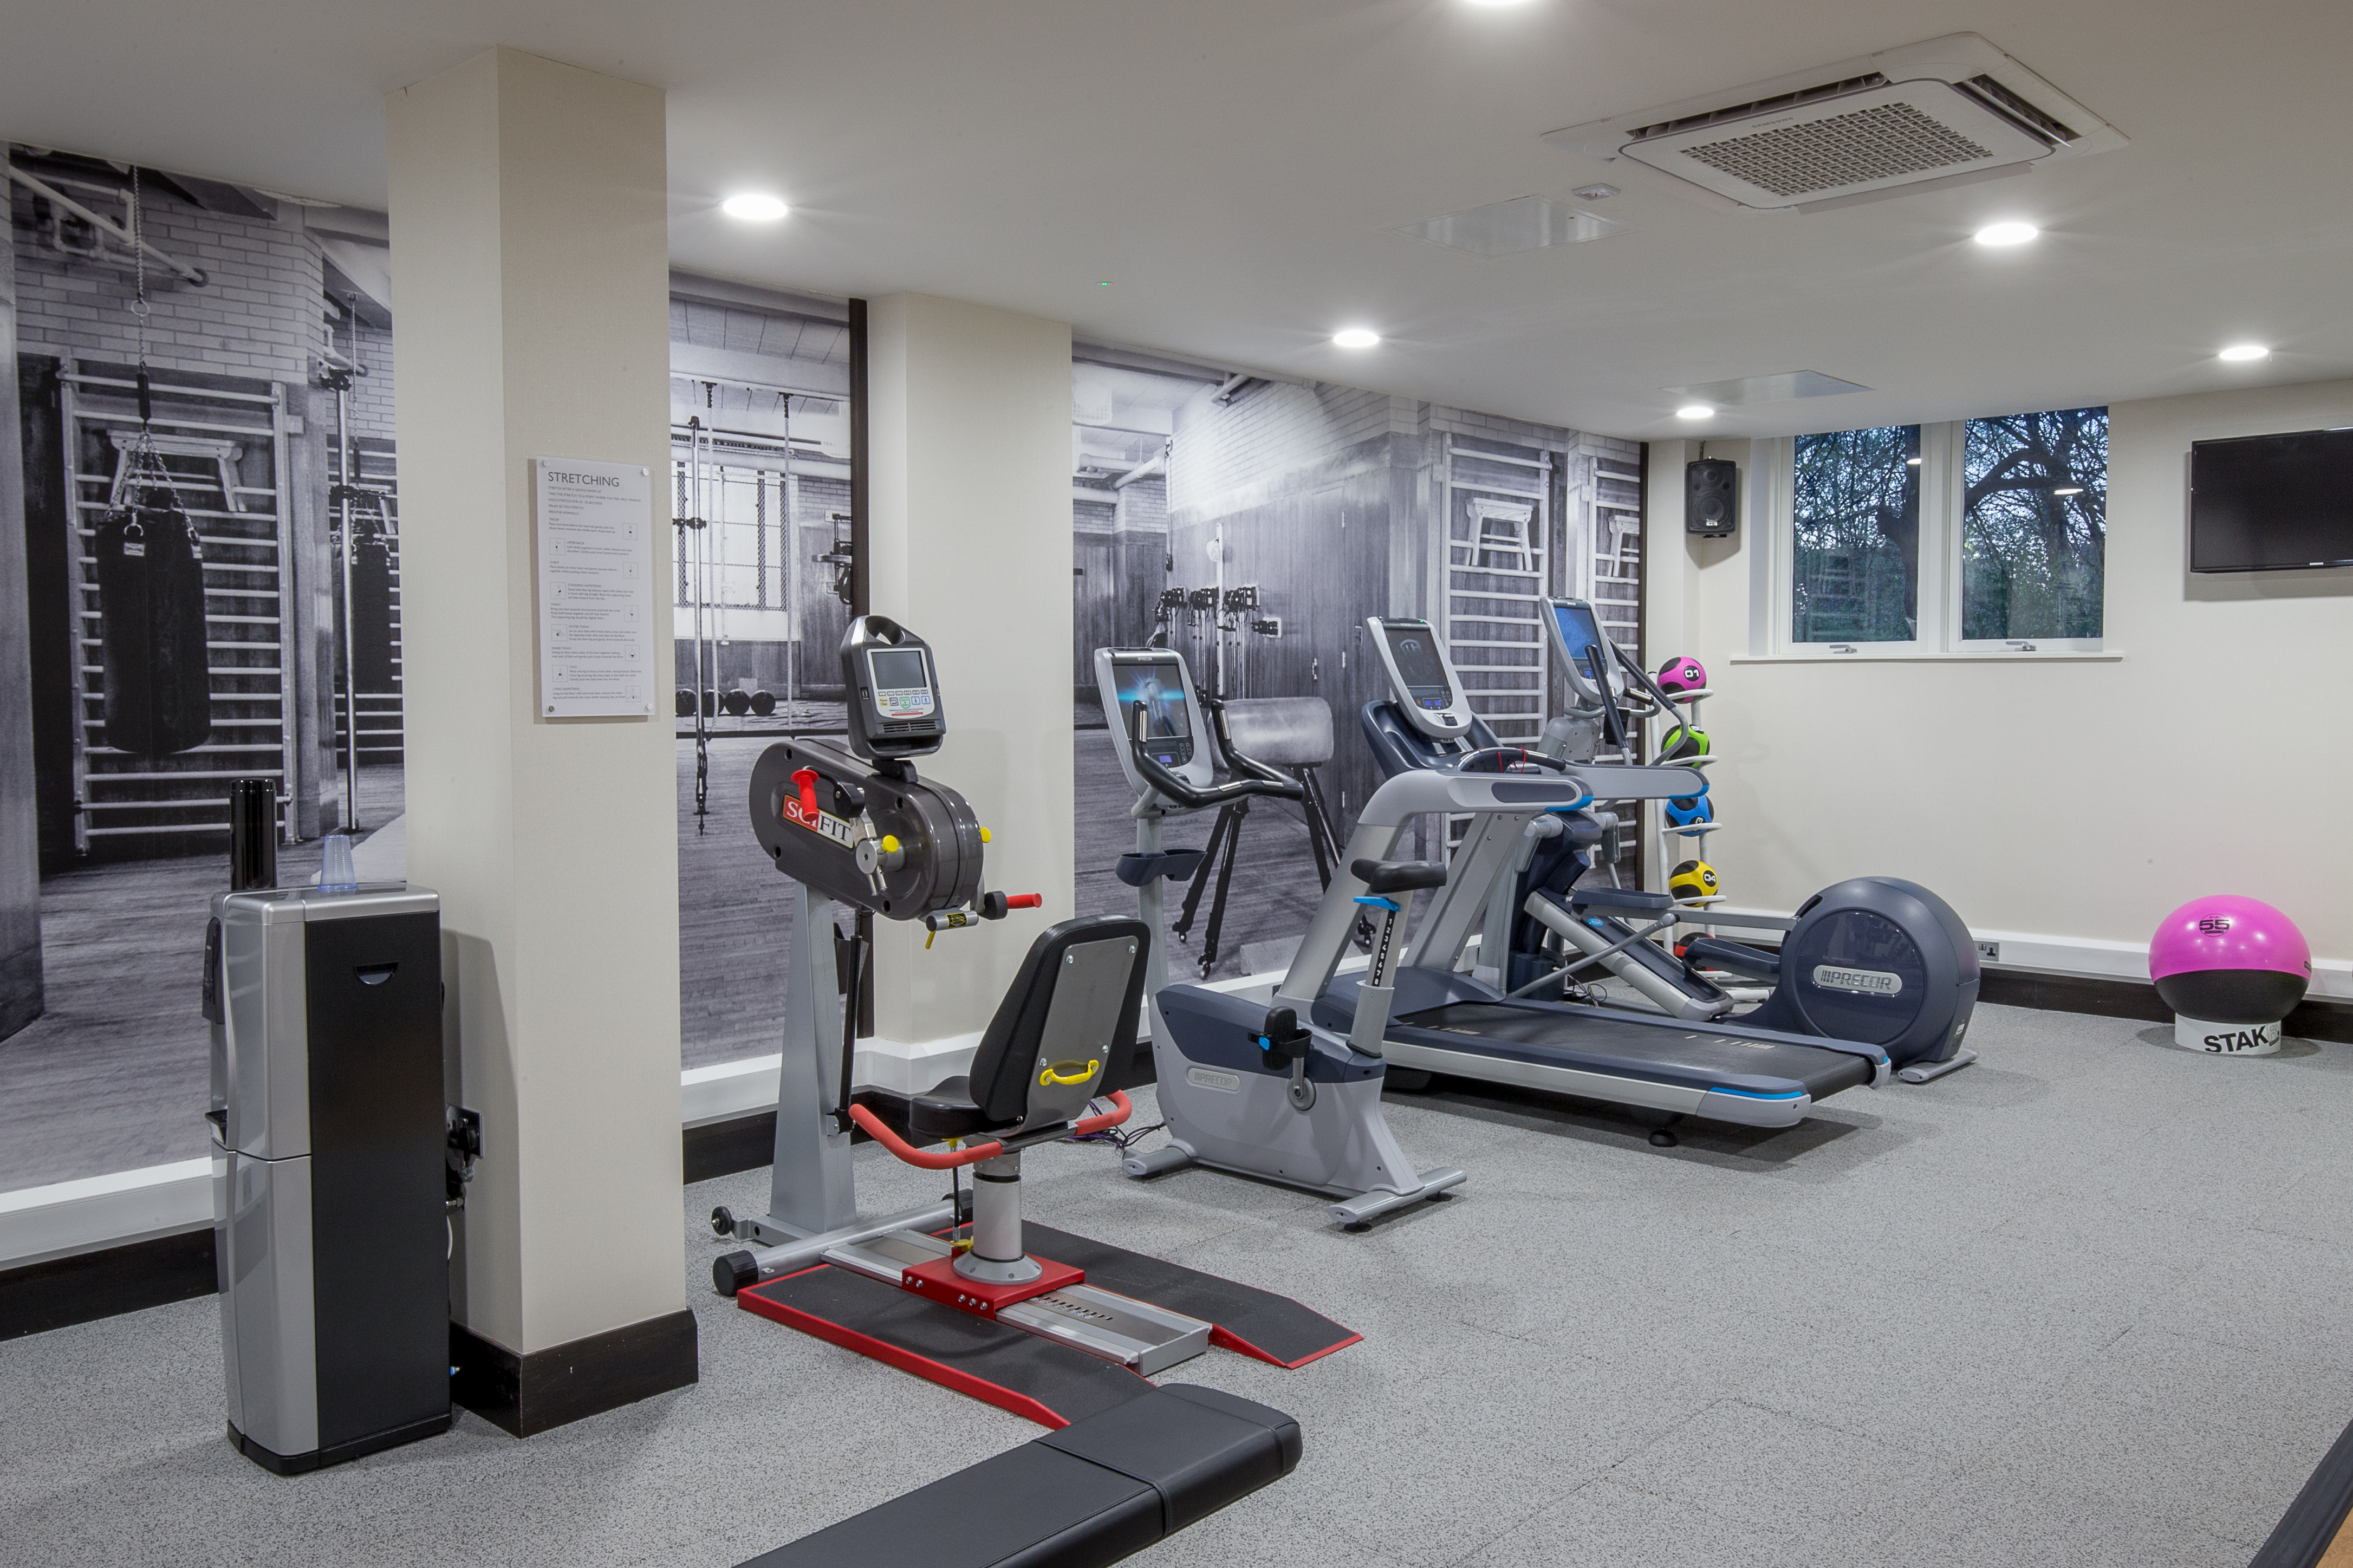 Fitness Suite With Weight Bench, Water Cooler, Mirrored Wall With Reflection of Punching Bag, Precor Cardio Equipment, Windows, TV, and Exercise Ball